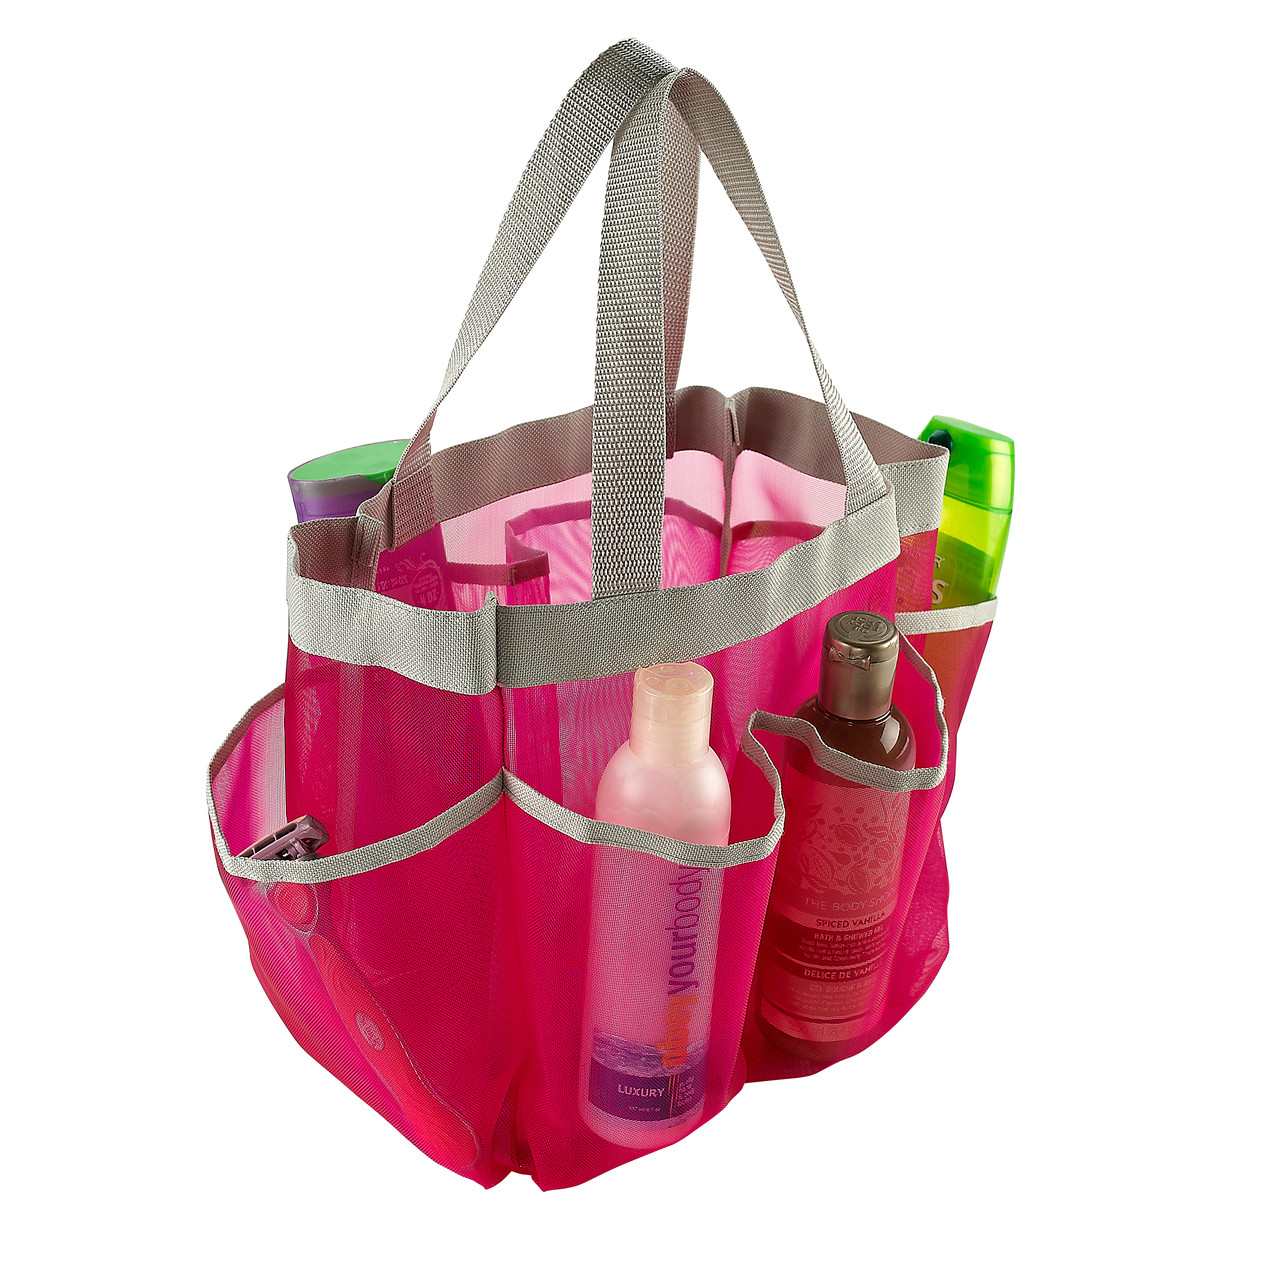 Mesh Shower Caddy Quick Dry Tote Bag Hanging Toiletry Bath Organizer Pink  Dorm